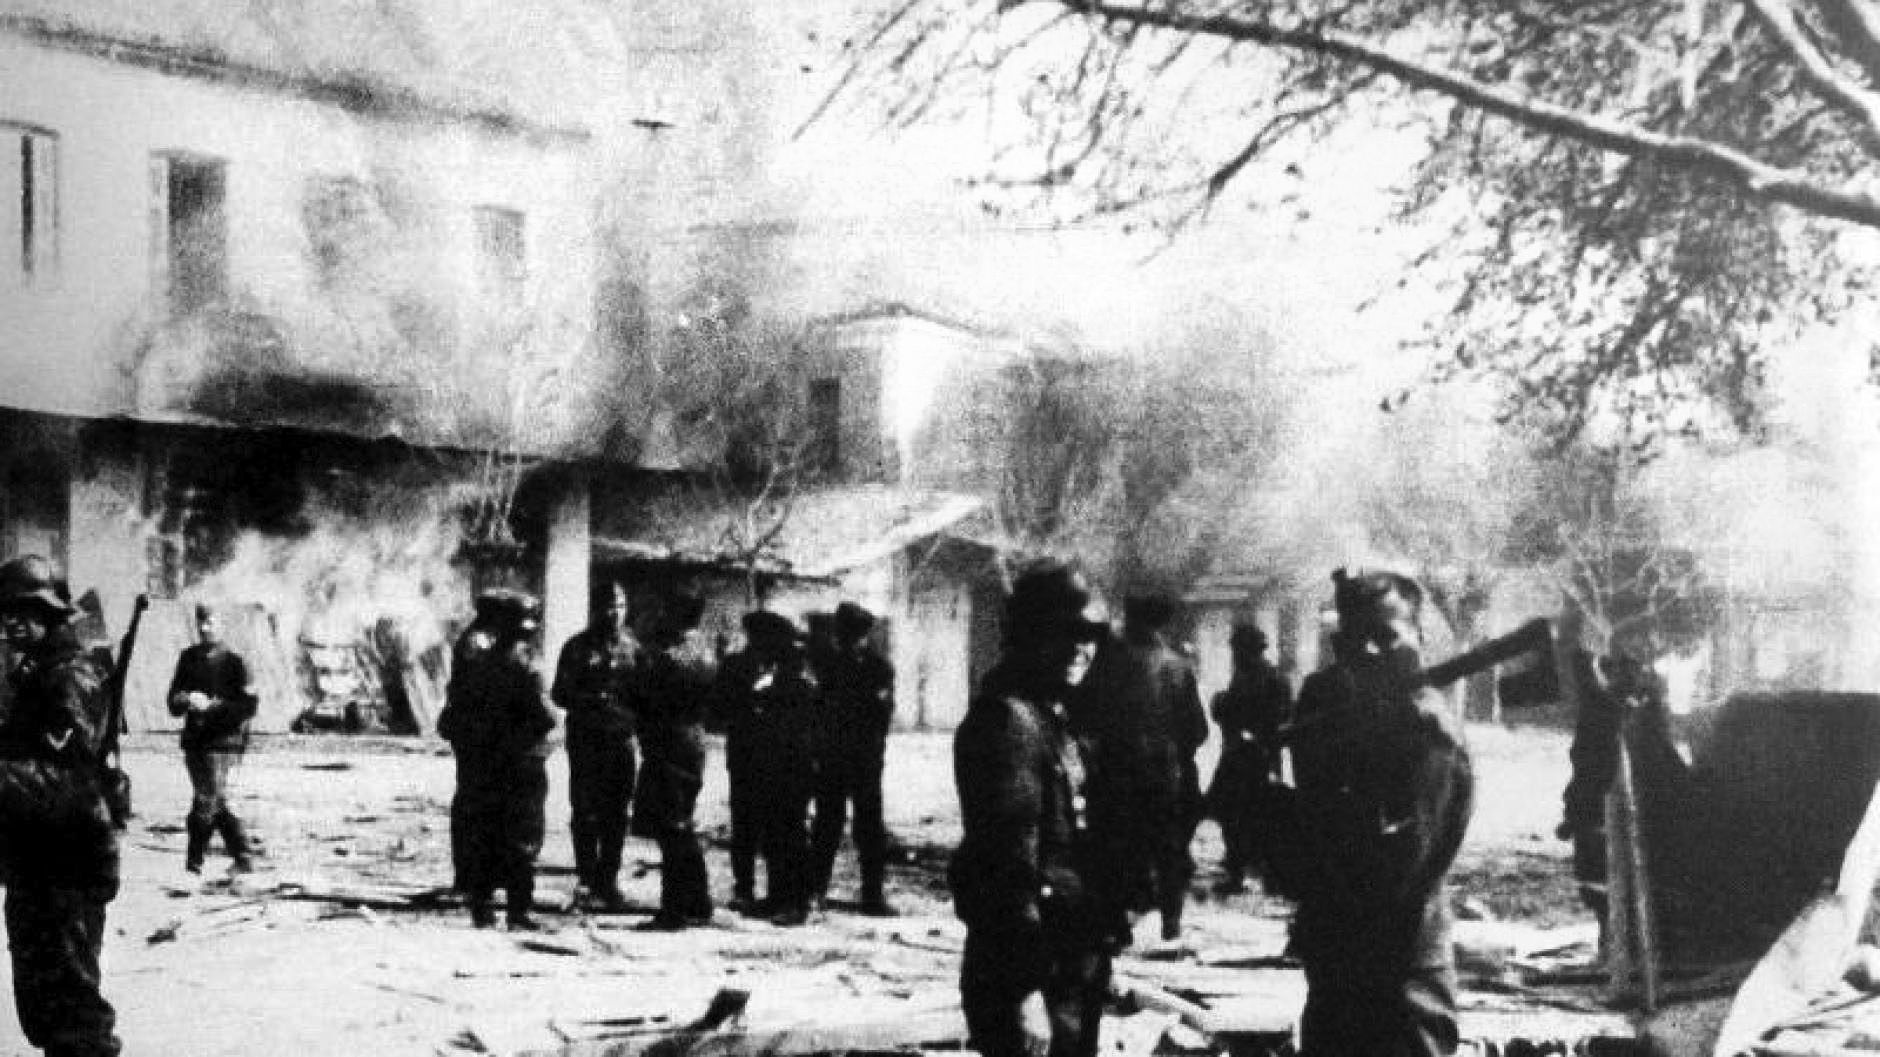 Many towns were wiped off the Greek map. Here, German soldiers put the small village of Distomo to the torch after murdering all of its 218 citizens, June 10, 1944.